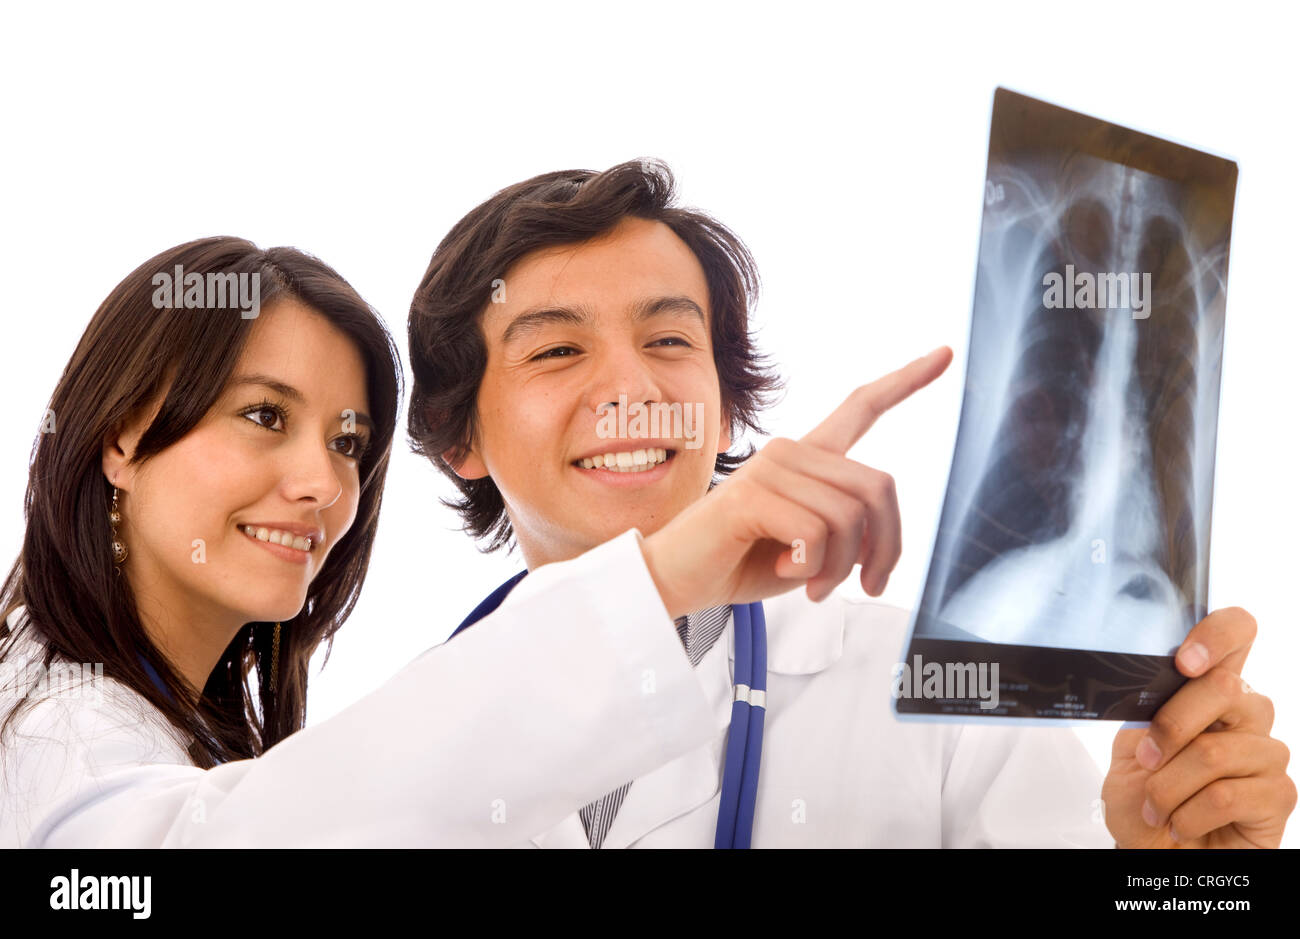 two young doctors looking at an xray, the woman is pointing at the image Stock Photo